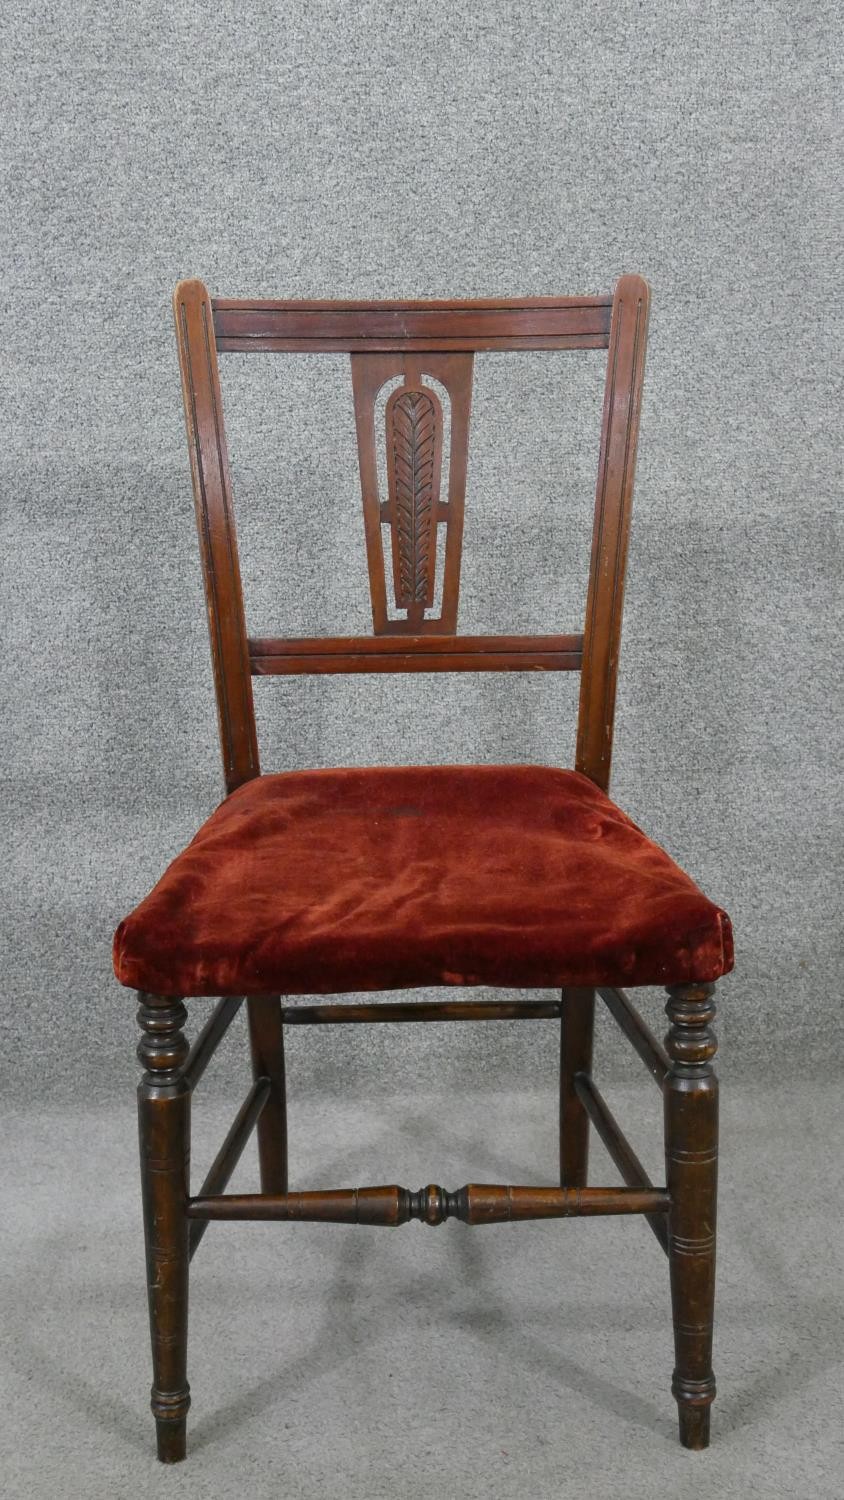 A pair of Edwardian walnut side chairs, the back with a carved foliate splat, over a red velour - Image 2 of 6